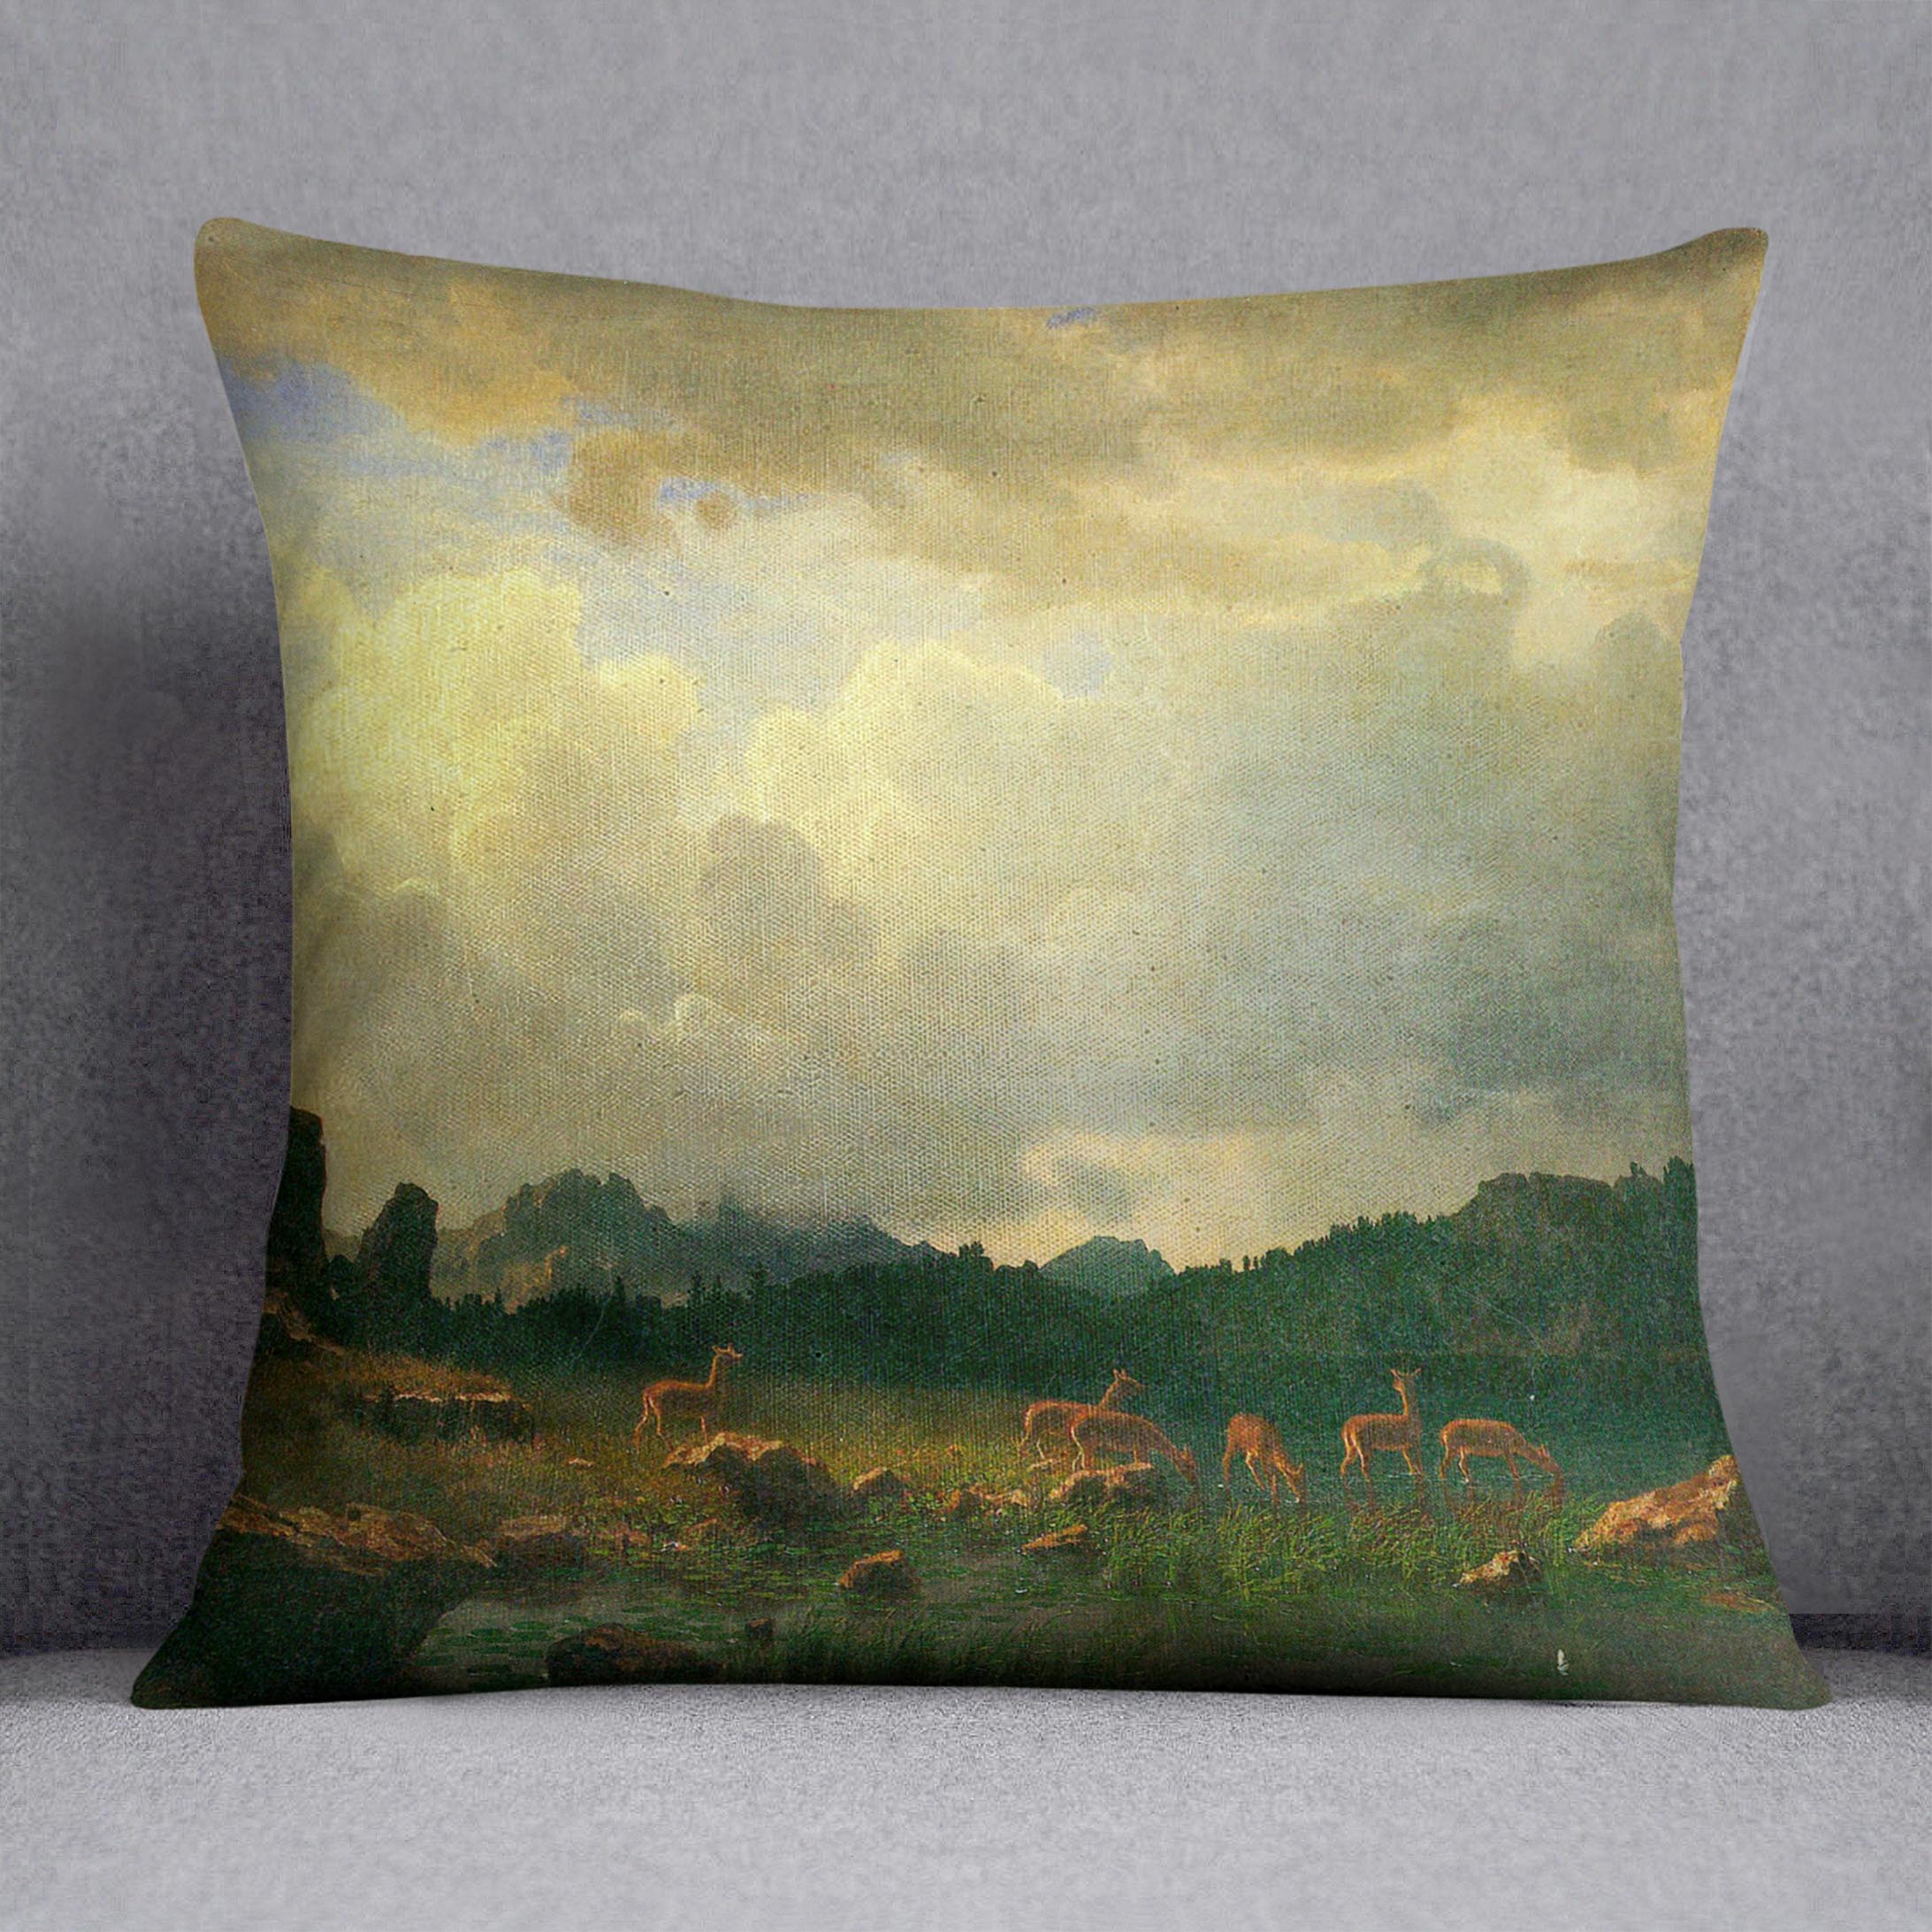 Thunderstorms in the Rocky Mountains by Bierstadt Cushion - Canvas Art Rocks - 1